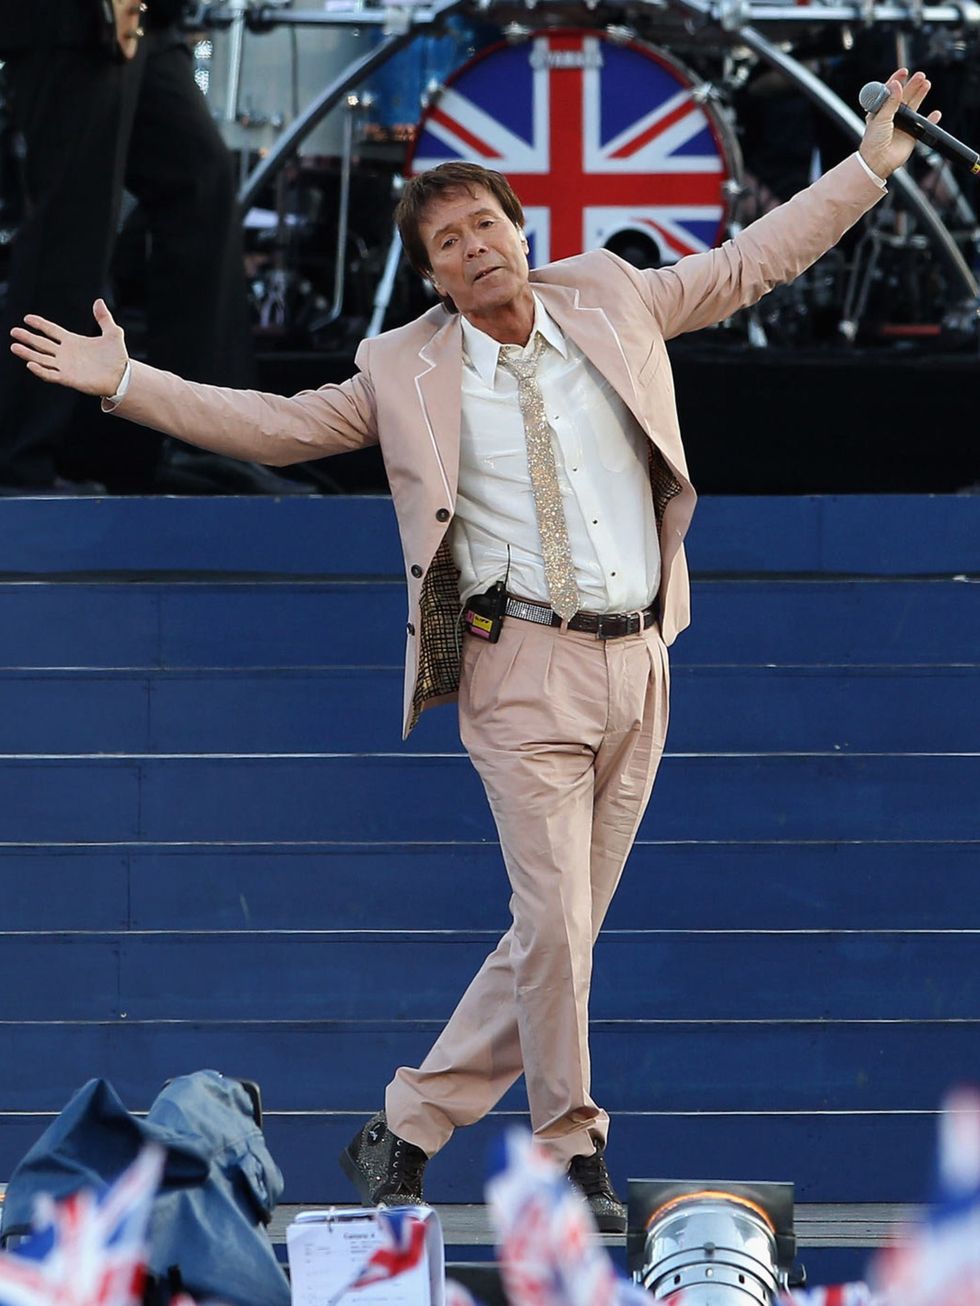 <p>Sir Cliff Richard wore a sparkling tie for his performance, singing 'Congratulations' at the Jubilee Concert in London.</p>